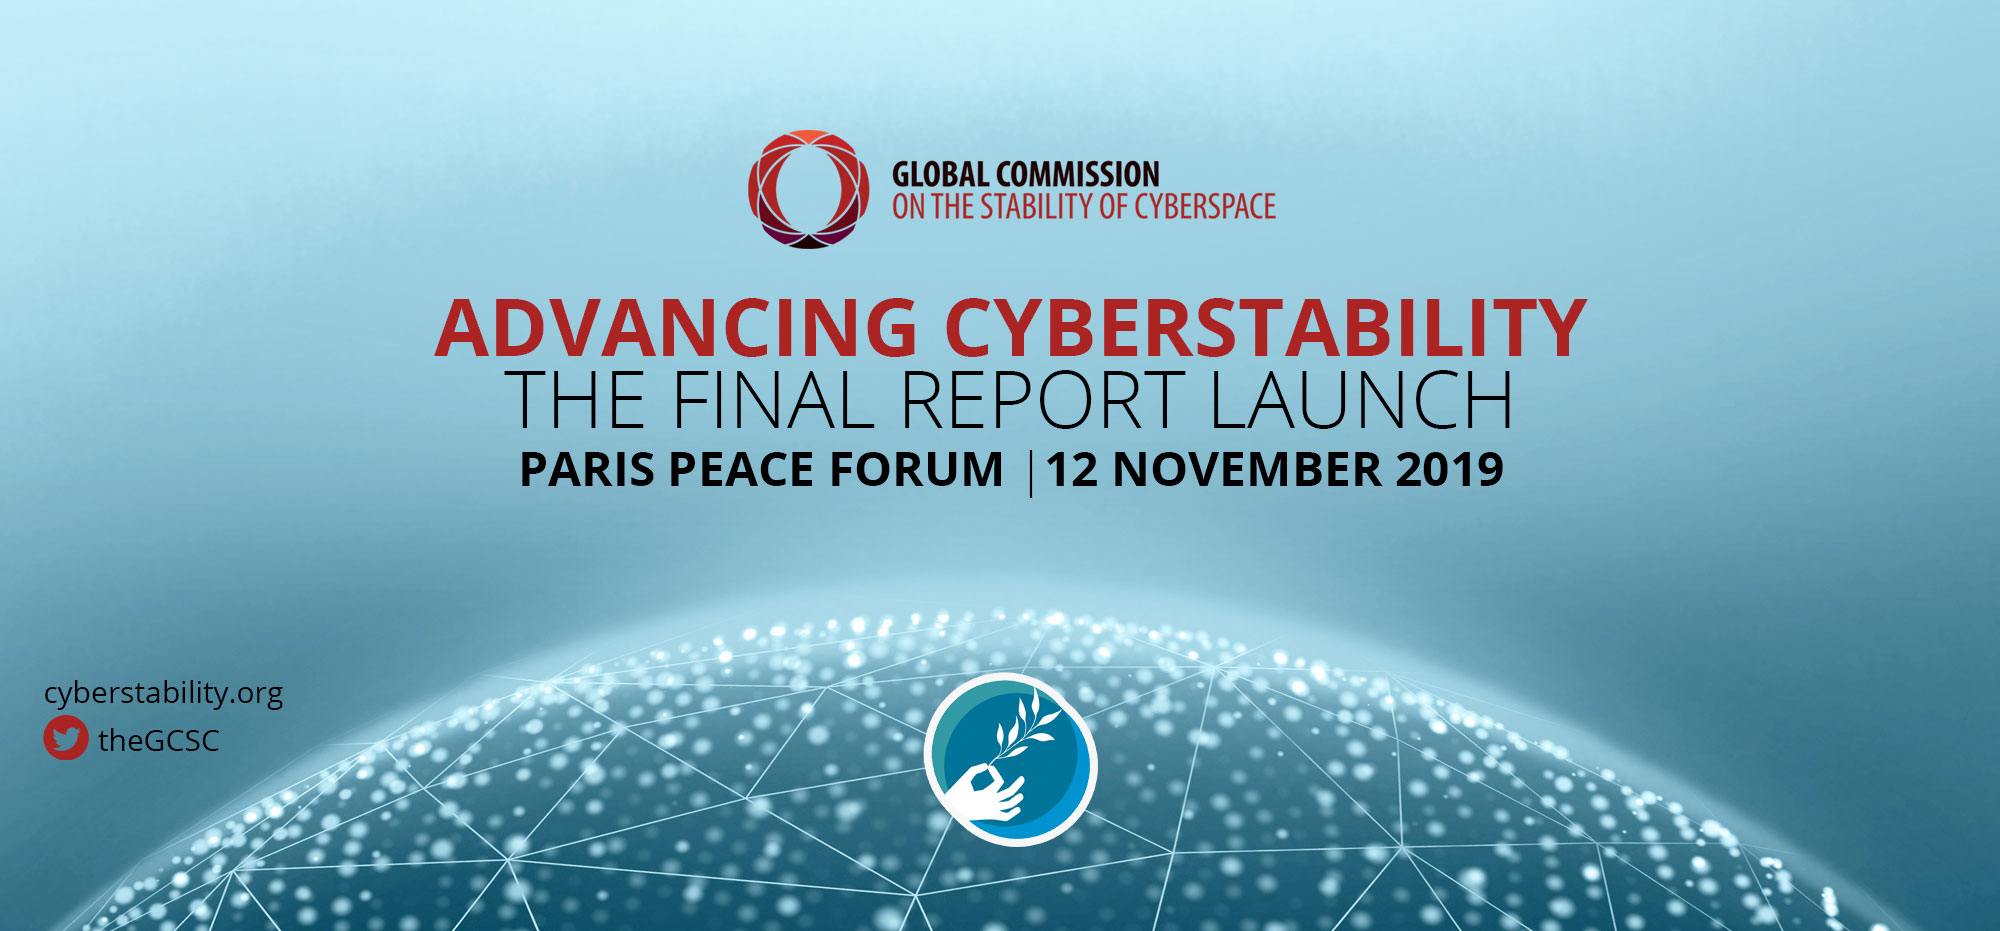 Global Commission to Release Report on 12 November at Paris
                  Peace Forum